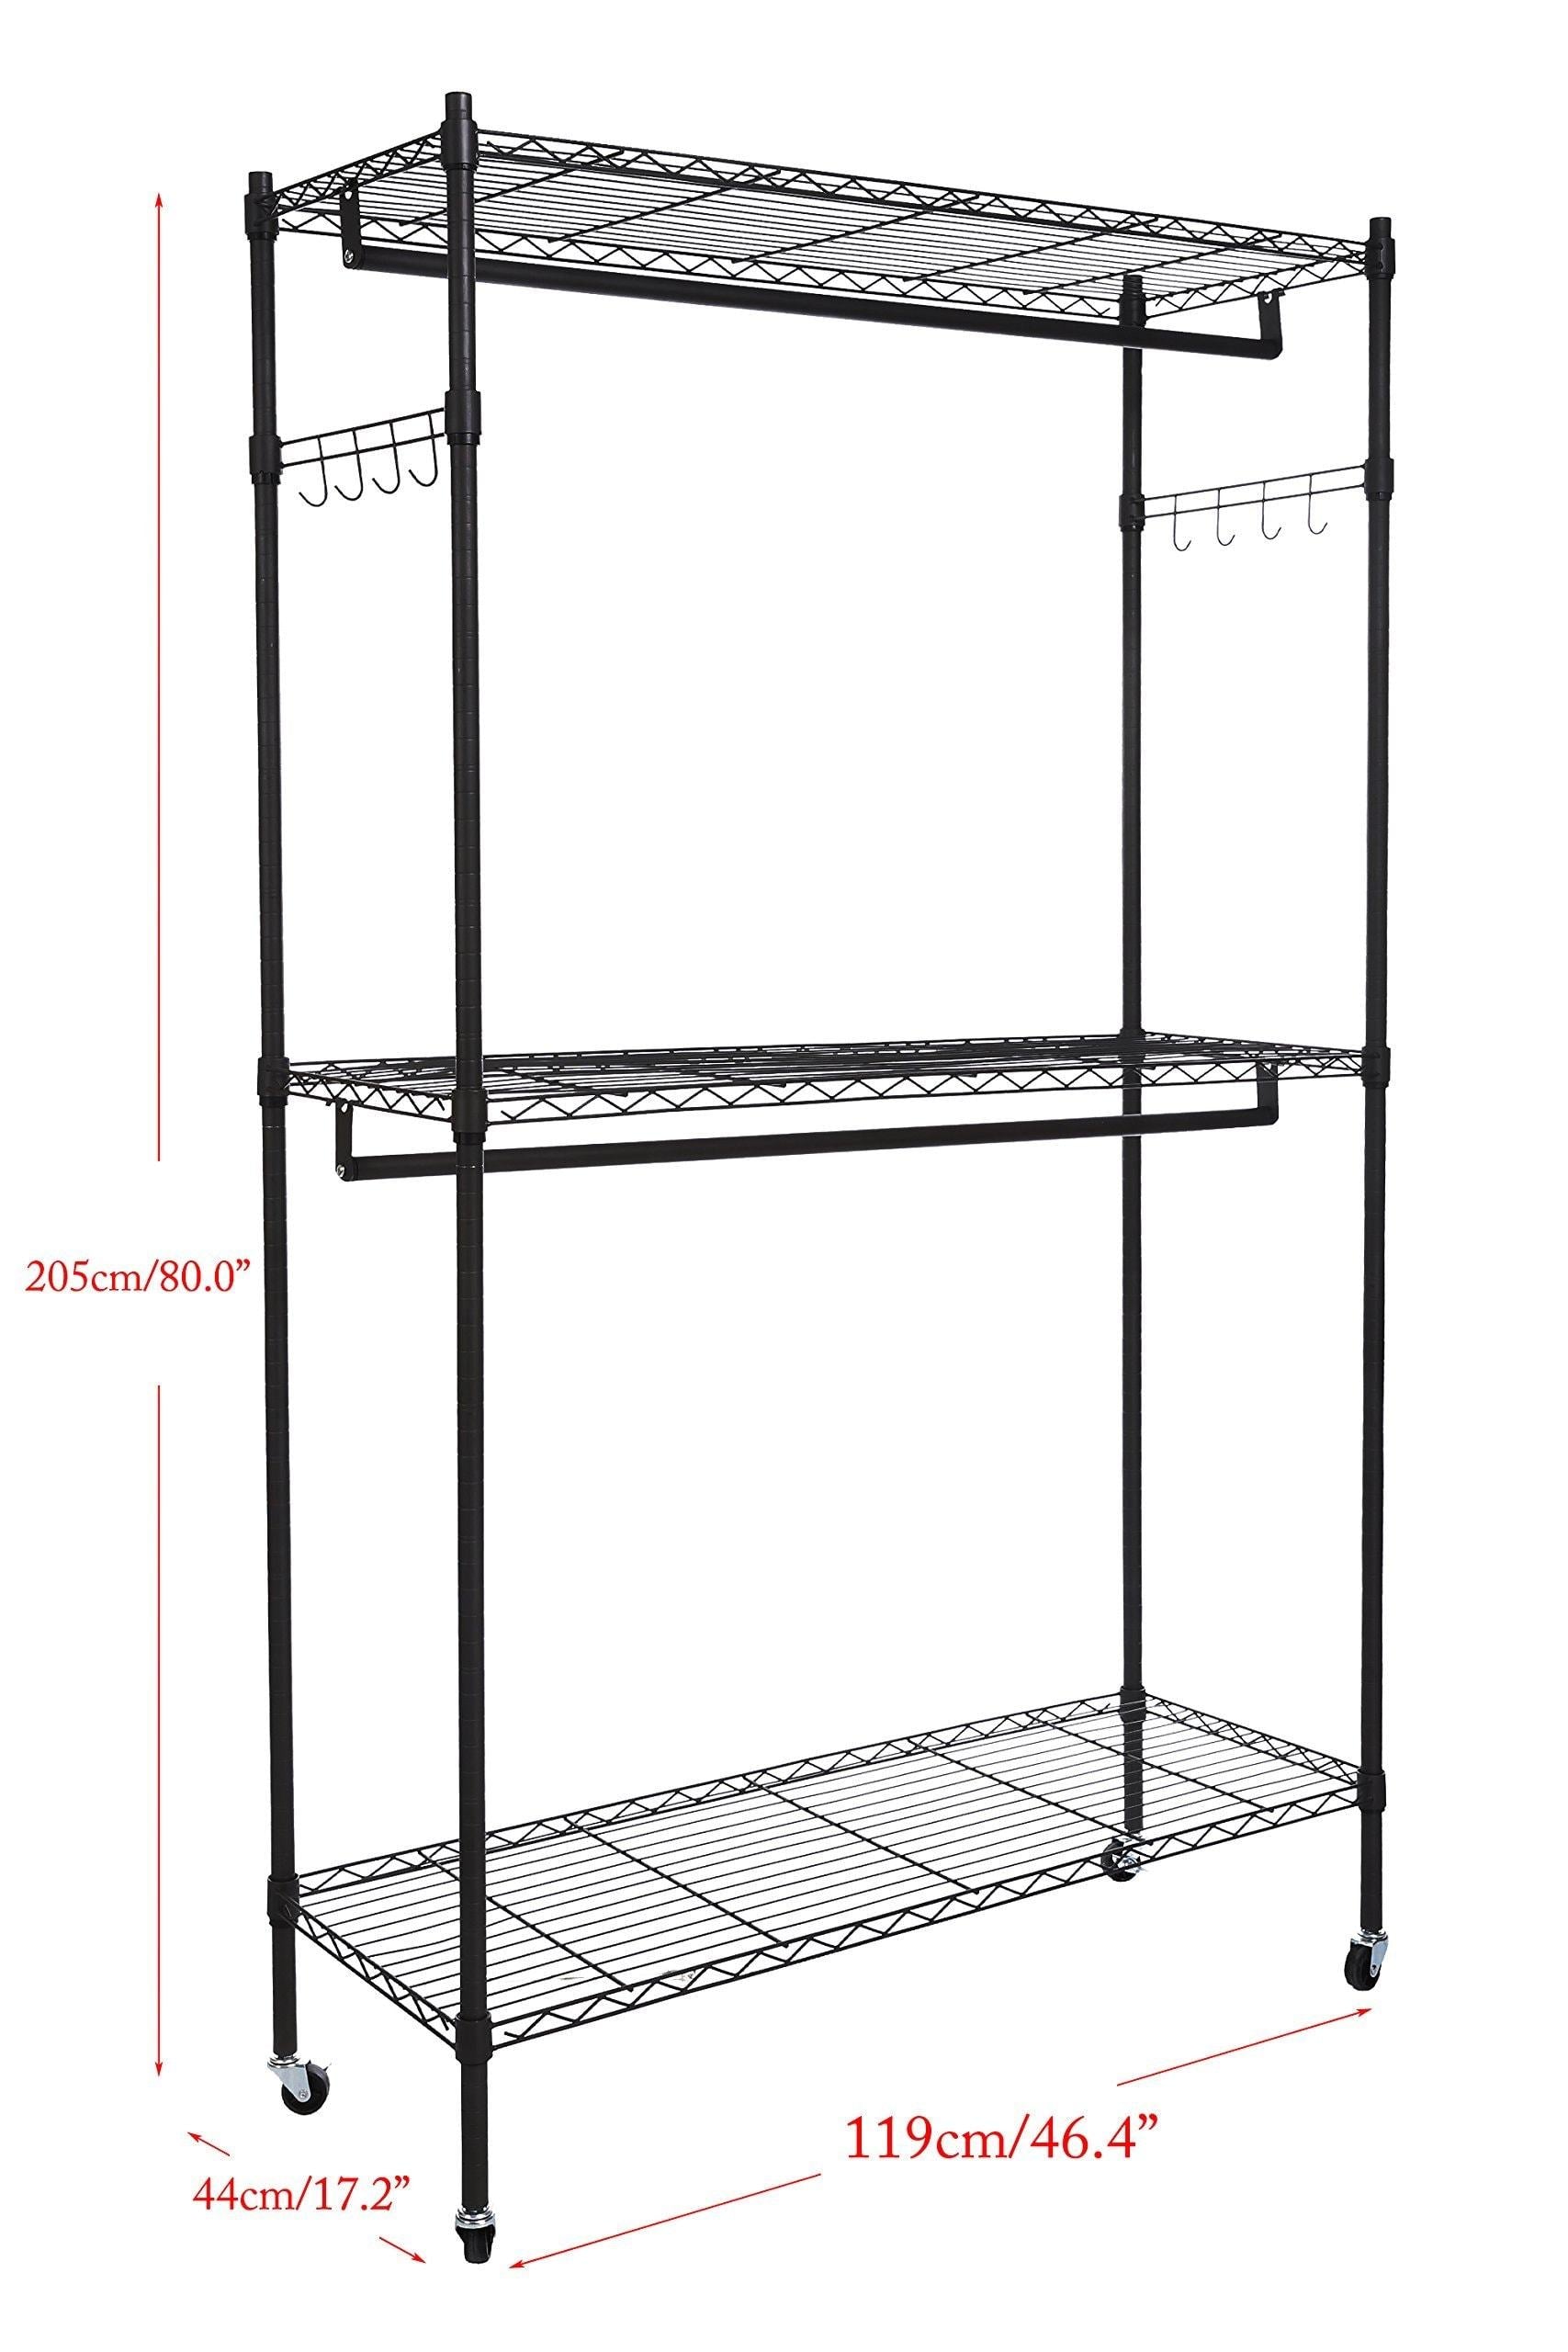 Discover the best homdox double rod closet 3 shelves wire shelving clothing rolling rack heavy duty garment rack with wheels and side hooks